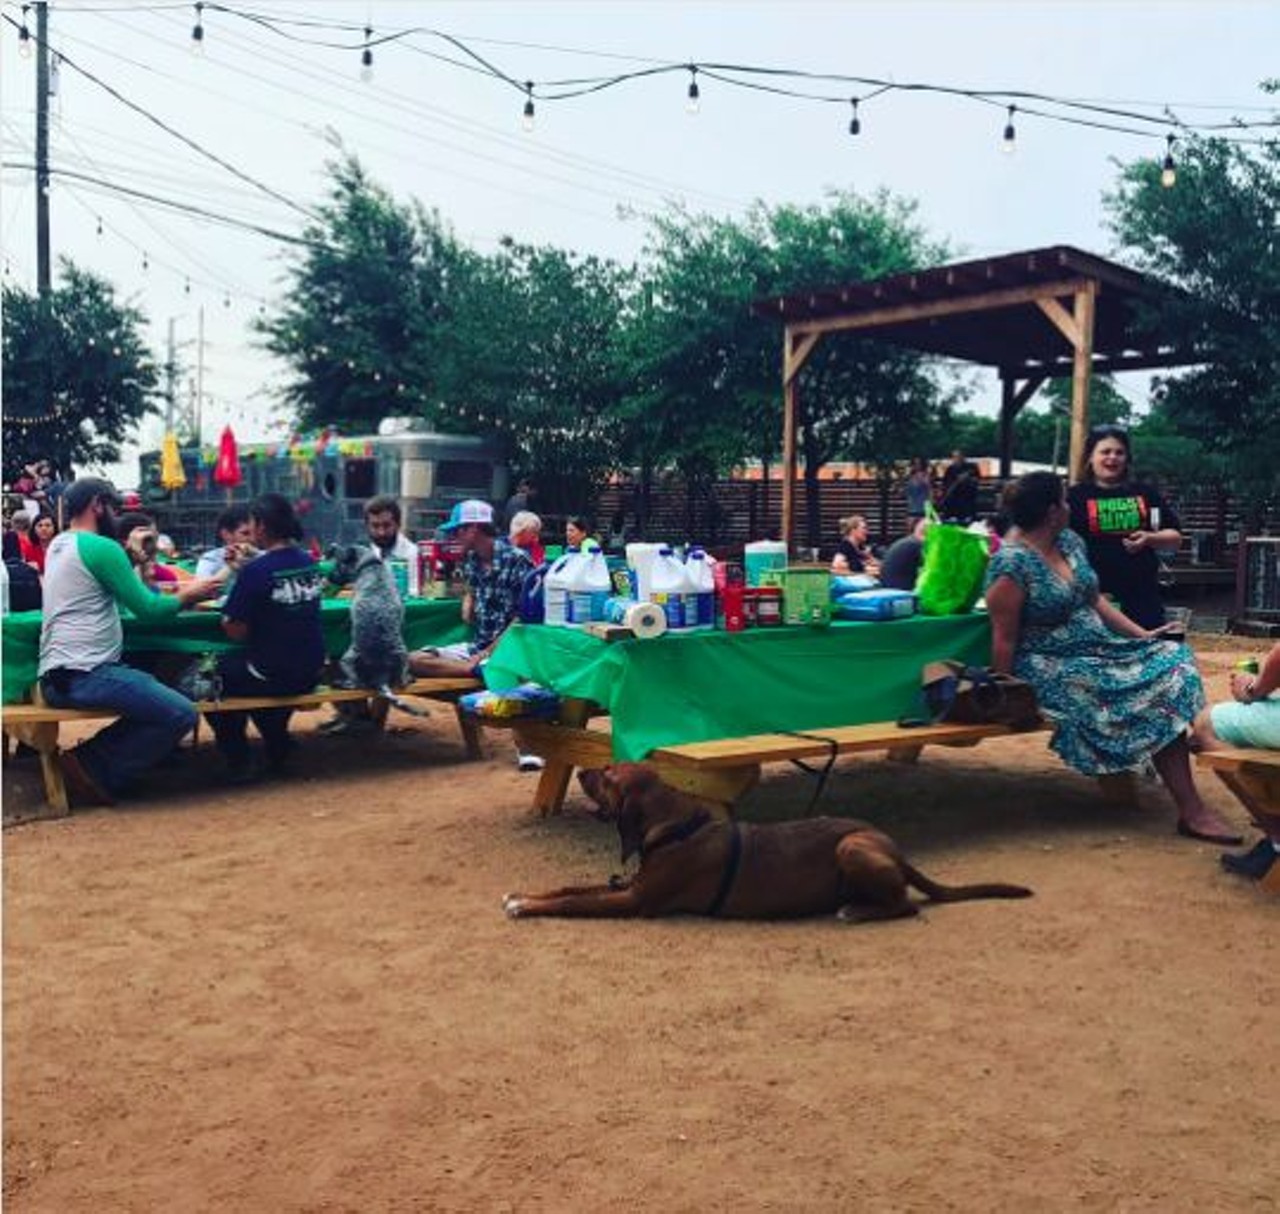 Burleson Yard Beer Garden  
430 Austin St., (210) 354-3001 
With a huge outdoor patio, the Burleson Yard is the perfect spot to bring pups. 
Photo via Instagram, sapatailwaggin